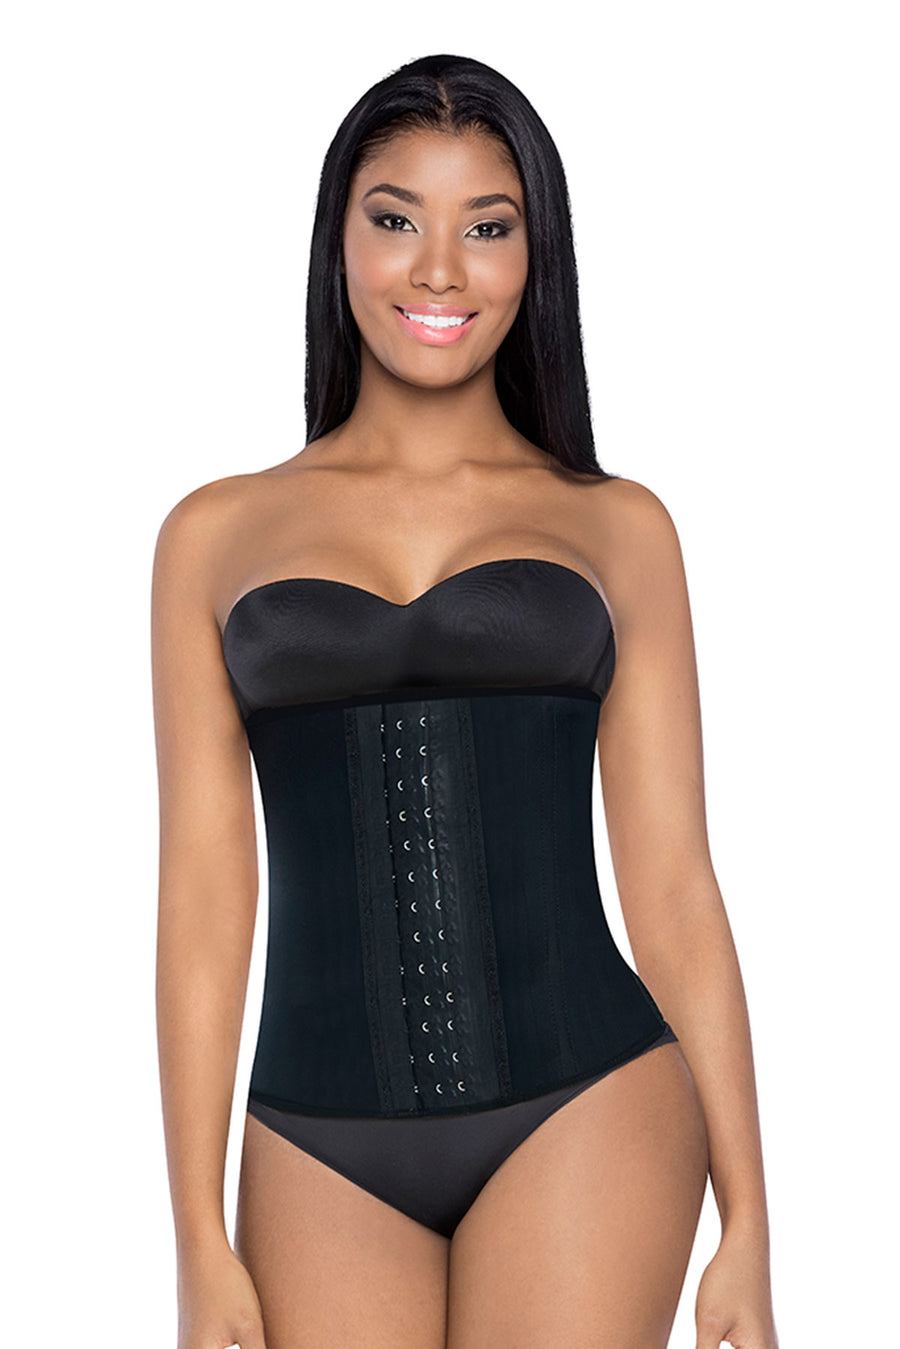 SEXCIES SHAPEWEAR FOR THE BEDROOM Trademark - Serial Number 85157837 ::  Justia Trademarks